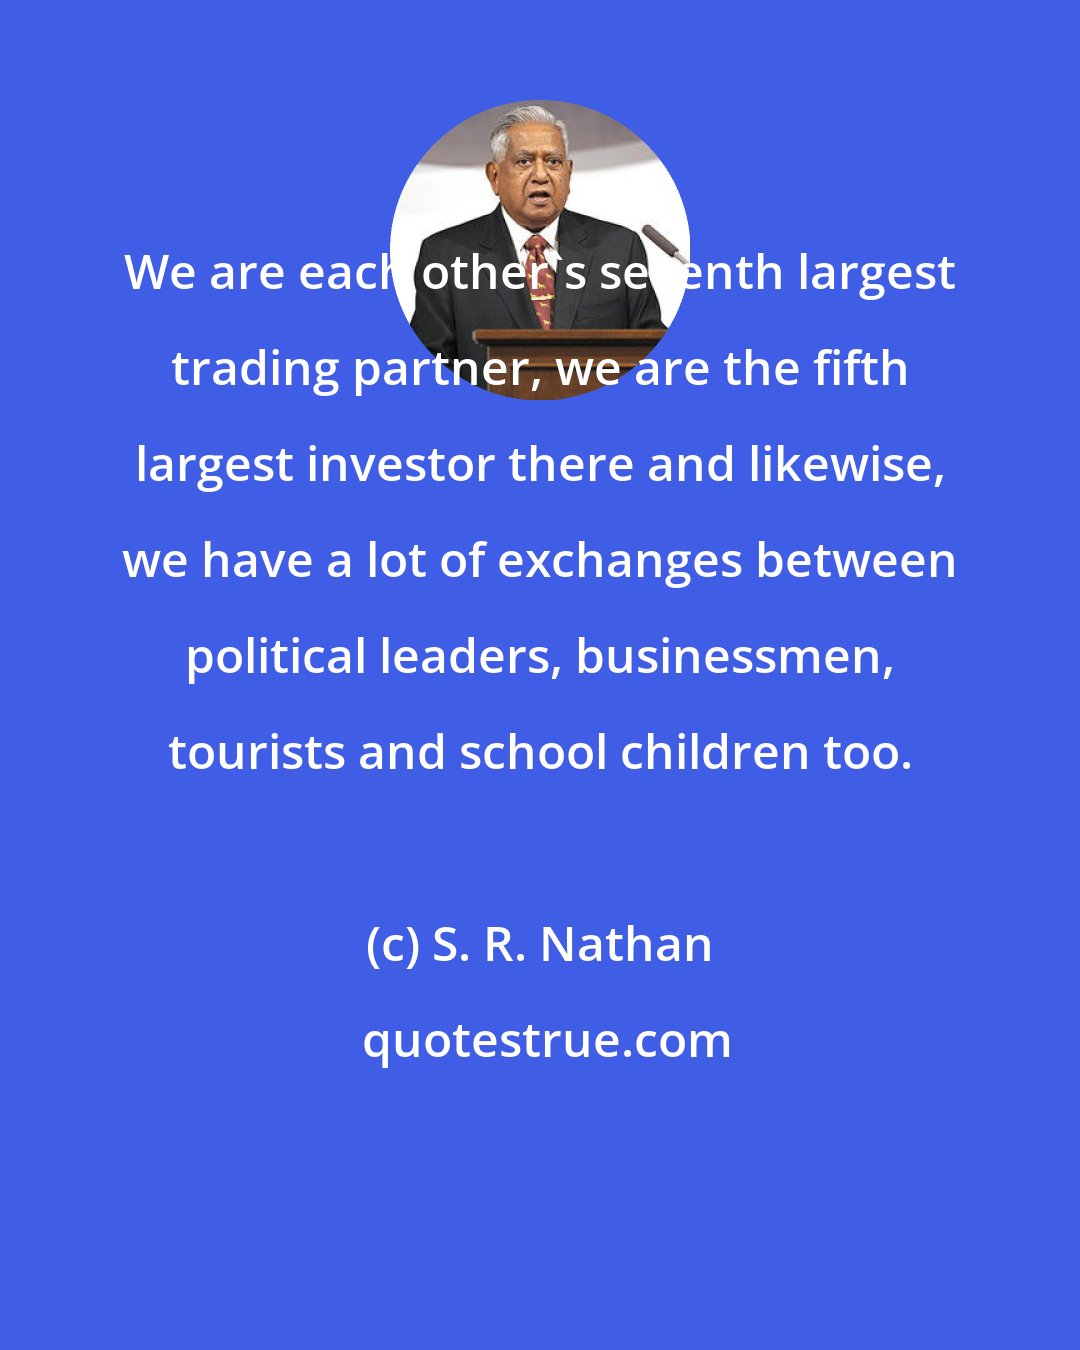 S. R. Nathan: We are each other's seventh largest trading partner, we are the fifth largest investor there and likewise, we have a lot of exchanges between political leaders, businessmen, tourists and school children too.